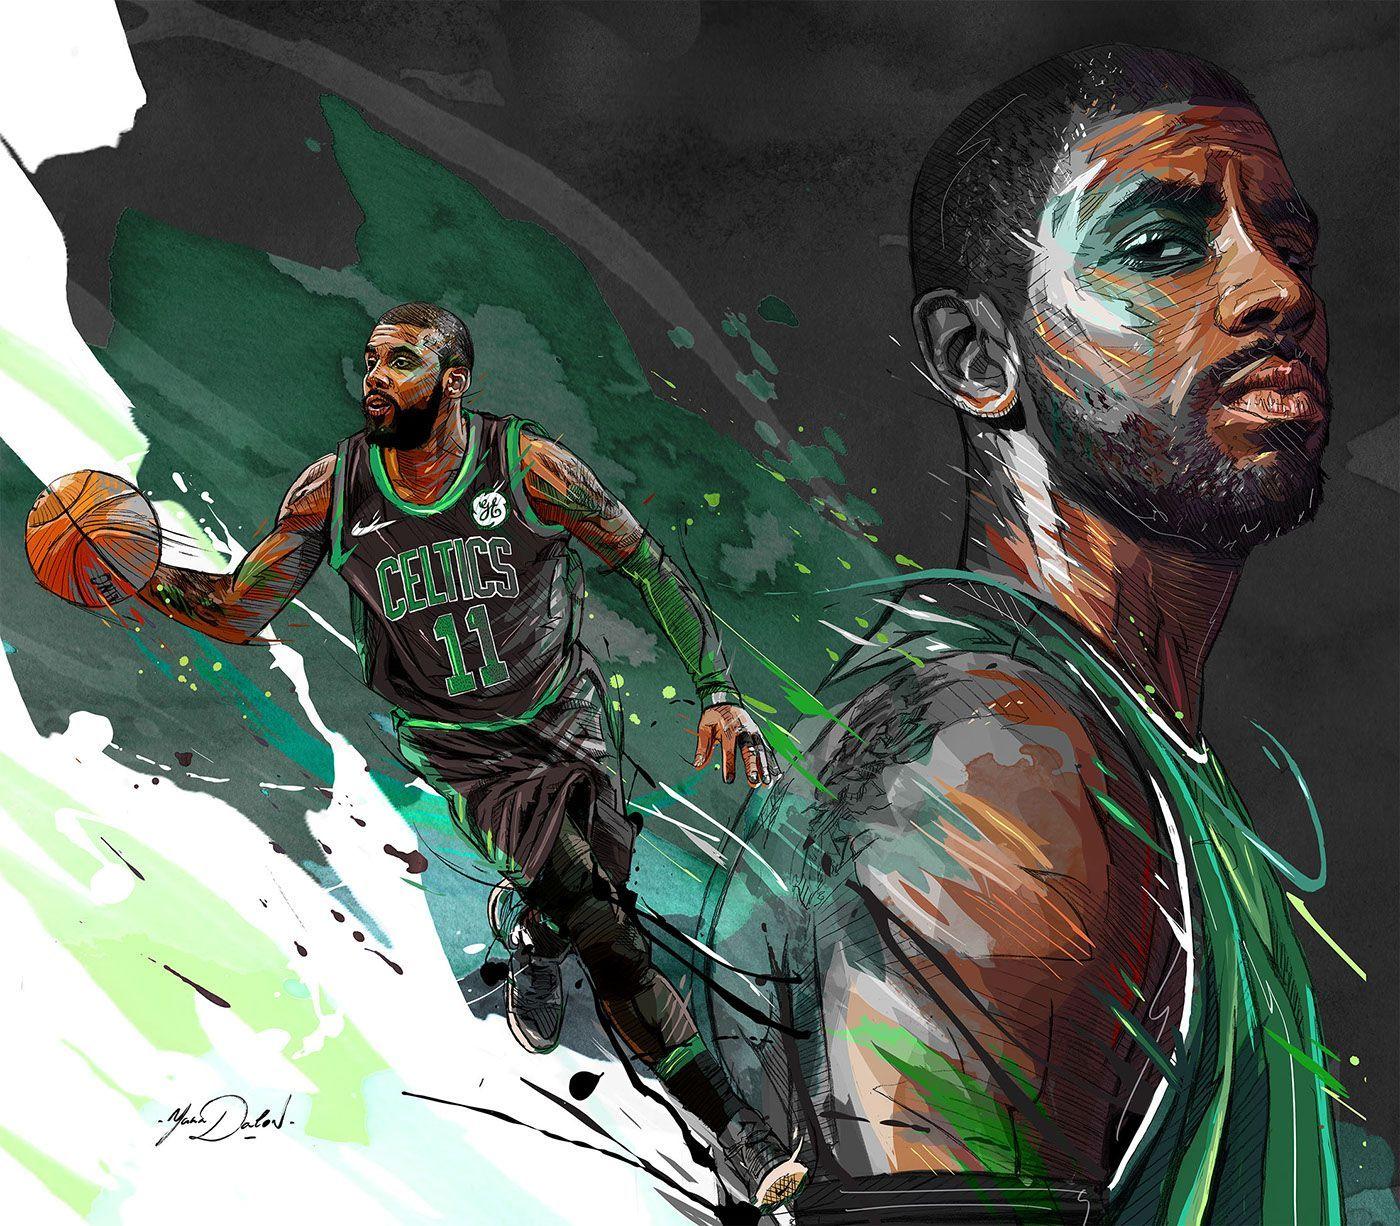 My painting of the famous player of the Boston Celtics, Kyrie Irving